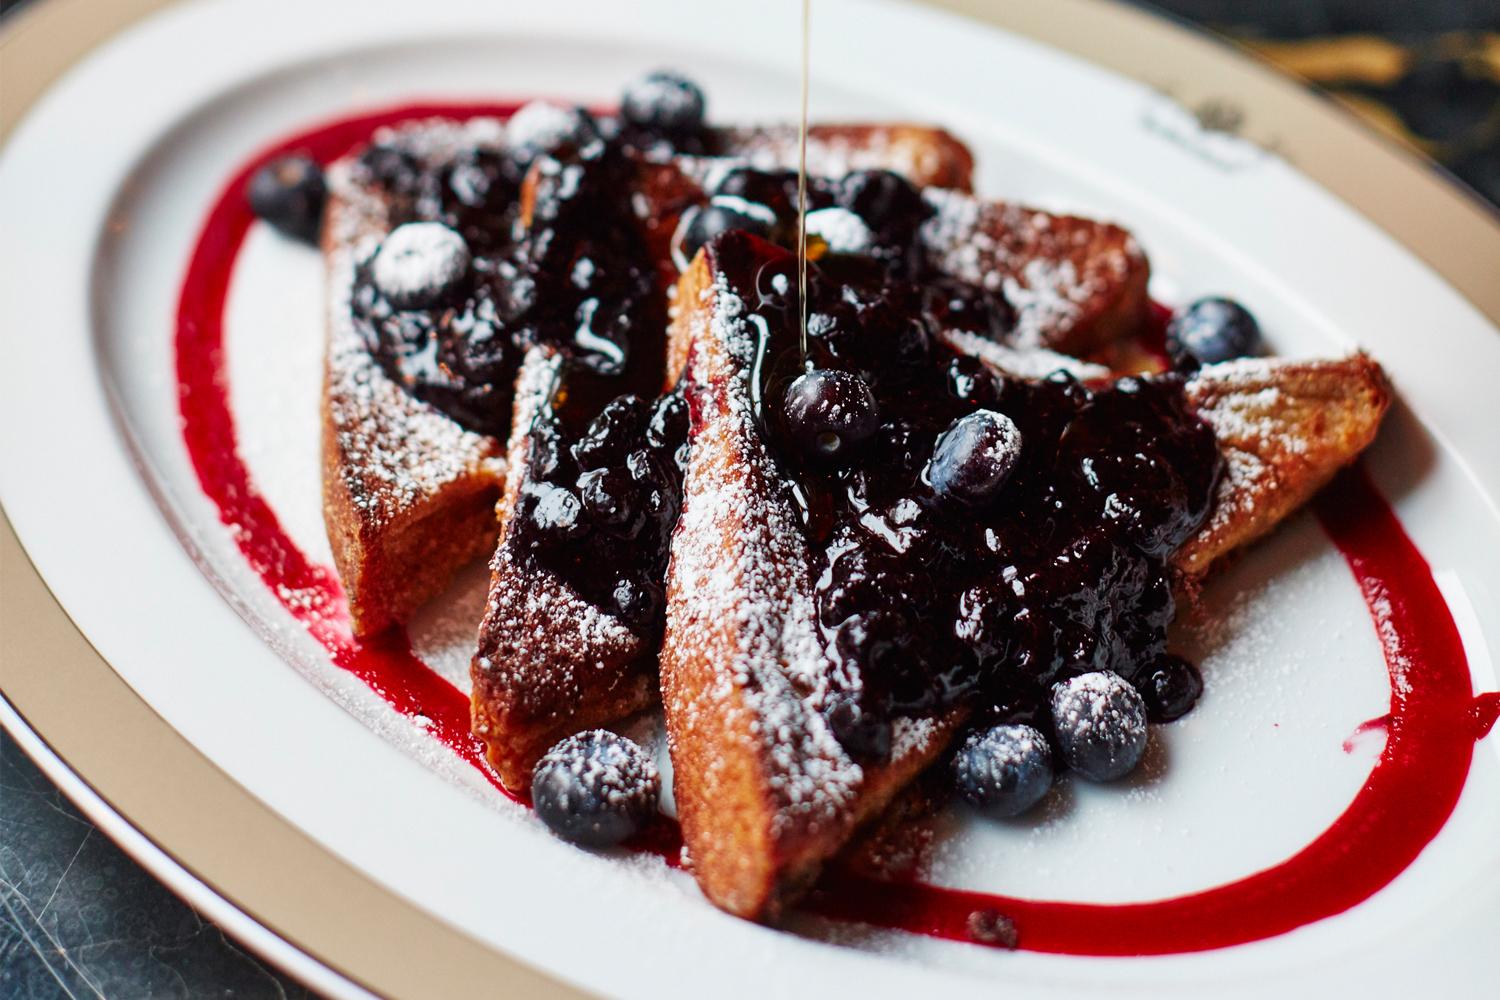 French toast at The Wolseley